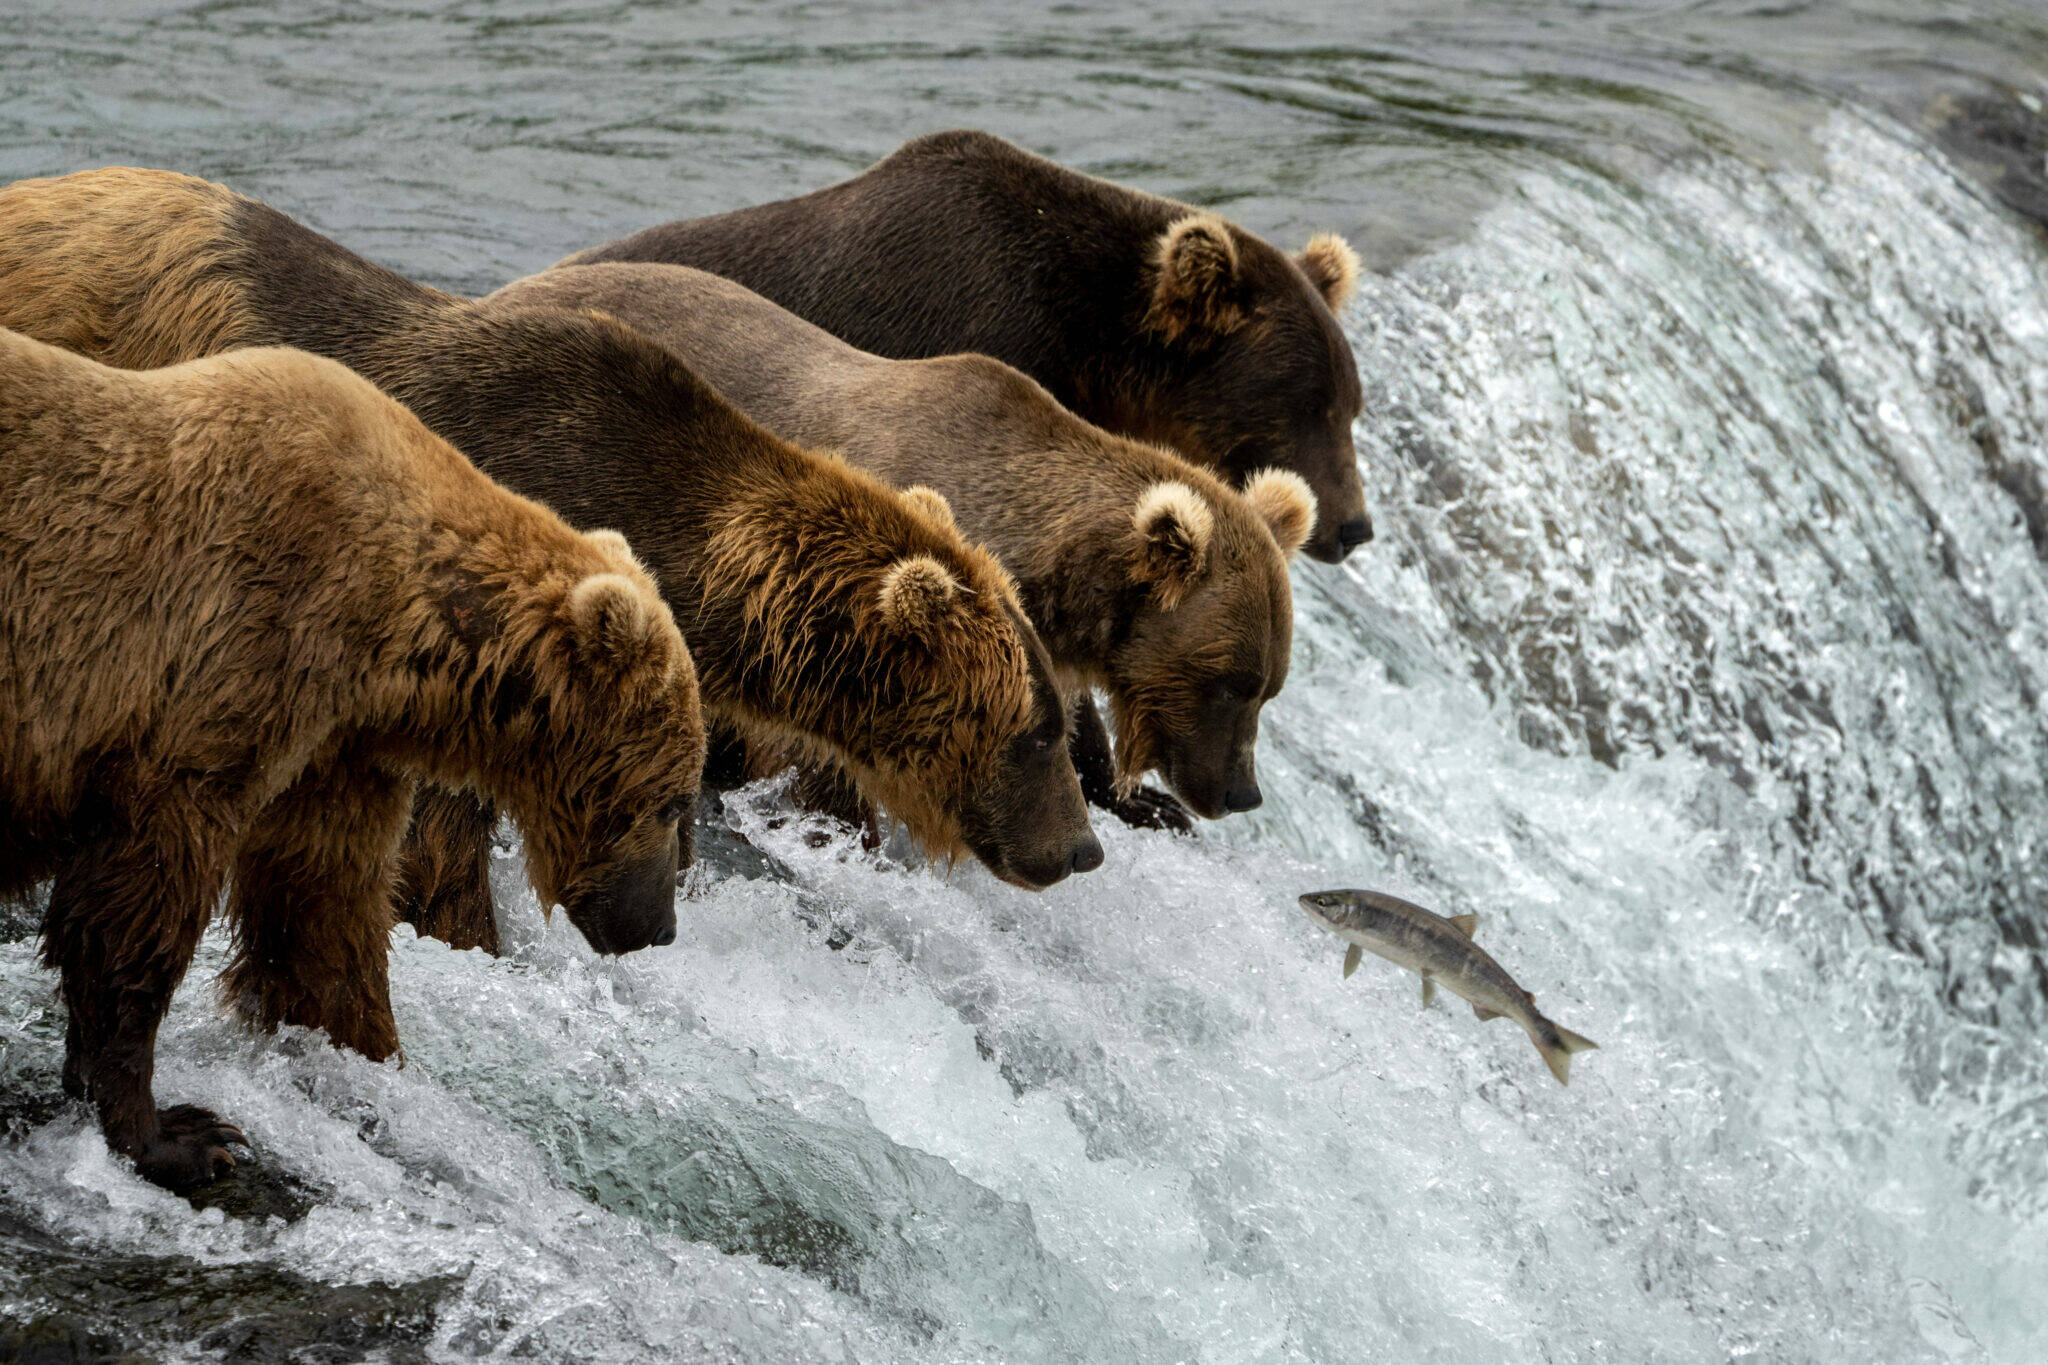 Four brown bears line up at the top of the falls on the Brooks River on Sept. 6, 2021, to fish for salmon. Brooks Falls draws bears from around the region, as well as Katmai National Park and Preserve tourists who travel there to view the bear crowds. One of the two lawsuits challenging the state’s predator-control program in the Mulchatna caribou area cites signs that some of the bears normally seen at Brooks Falls may have been among the 99 bears killed in the spring campaign carried out by the Alaska Department of Fish and Game. (Photo by L. Law/National Park Service)